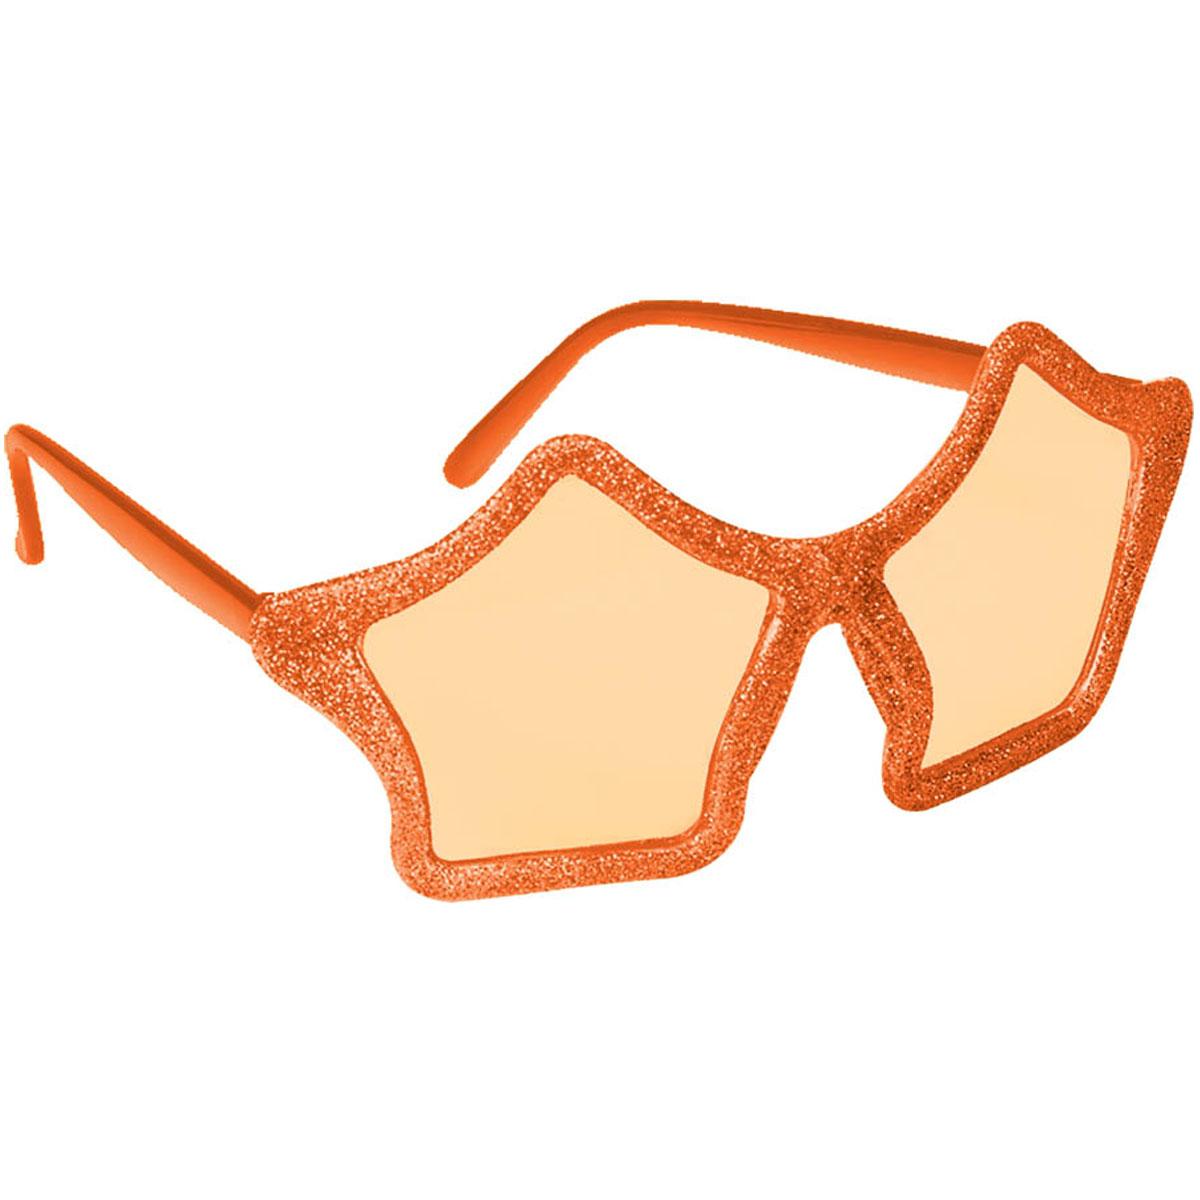 Orange Star Shades Costumes & Apparel - Party Centre - Party Centre